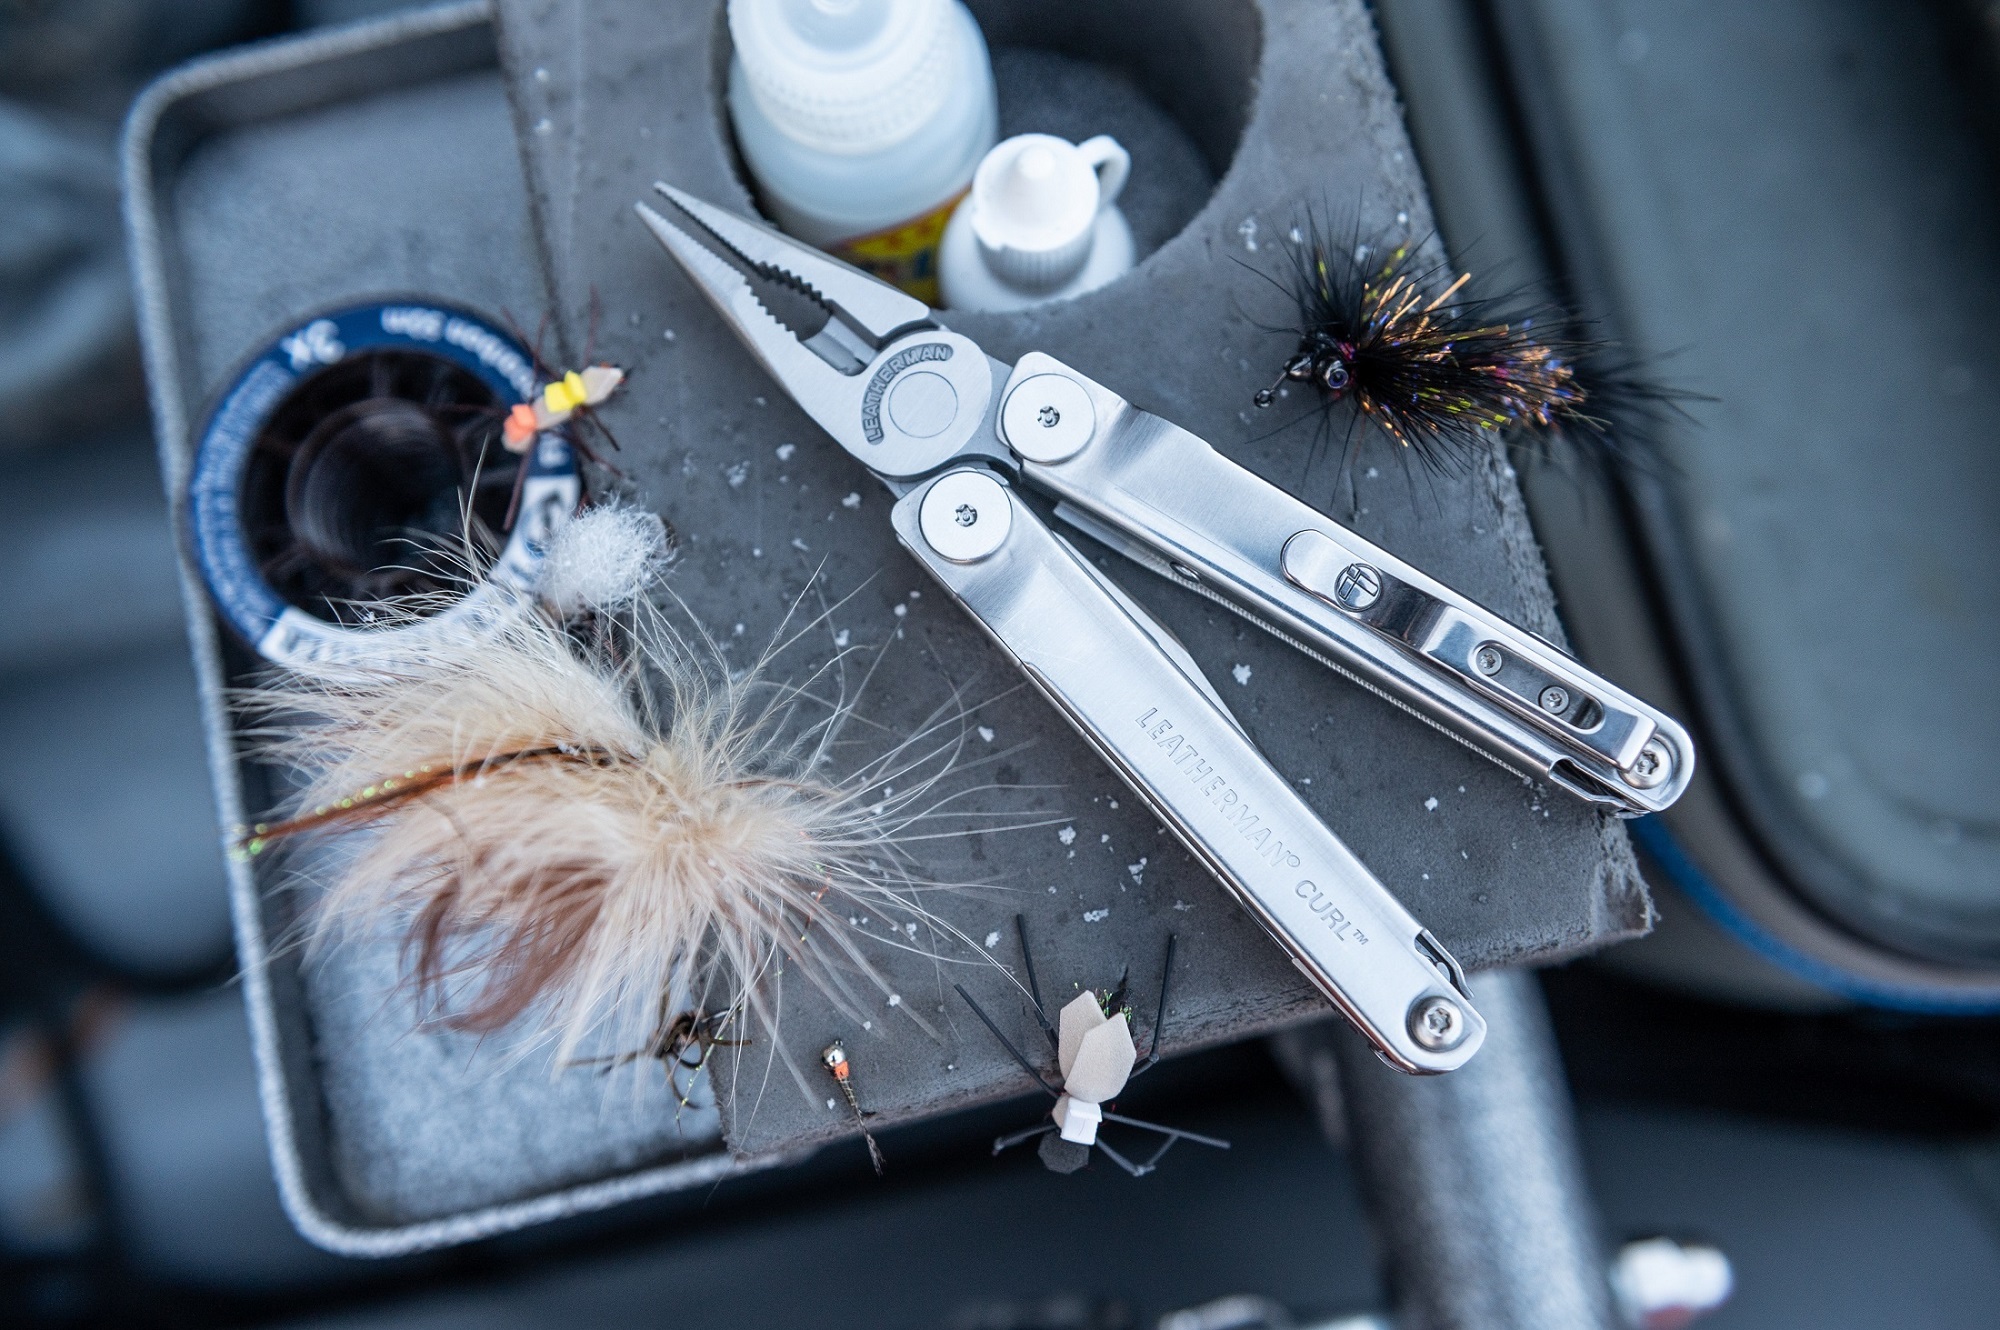 The New Leatherman Curl Multi-Tool with Bit Kit Compatibility - Bikerumor